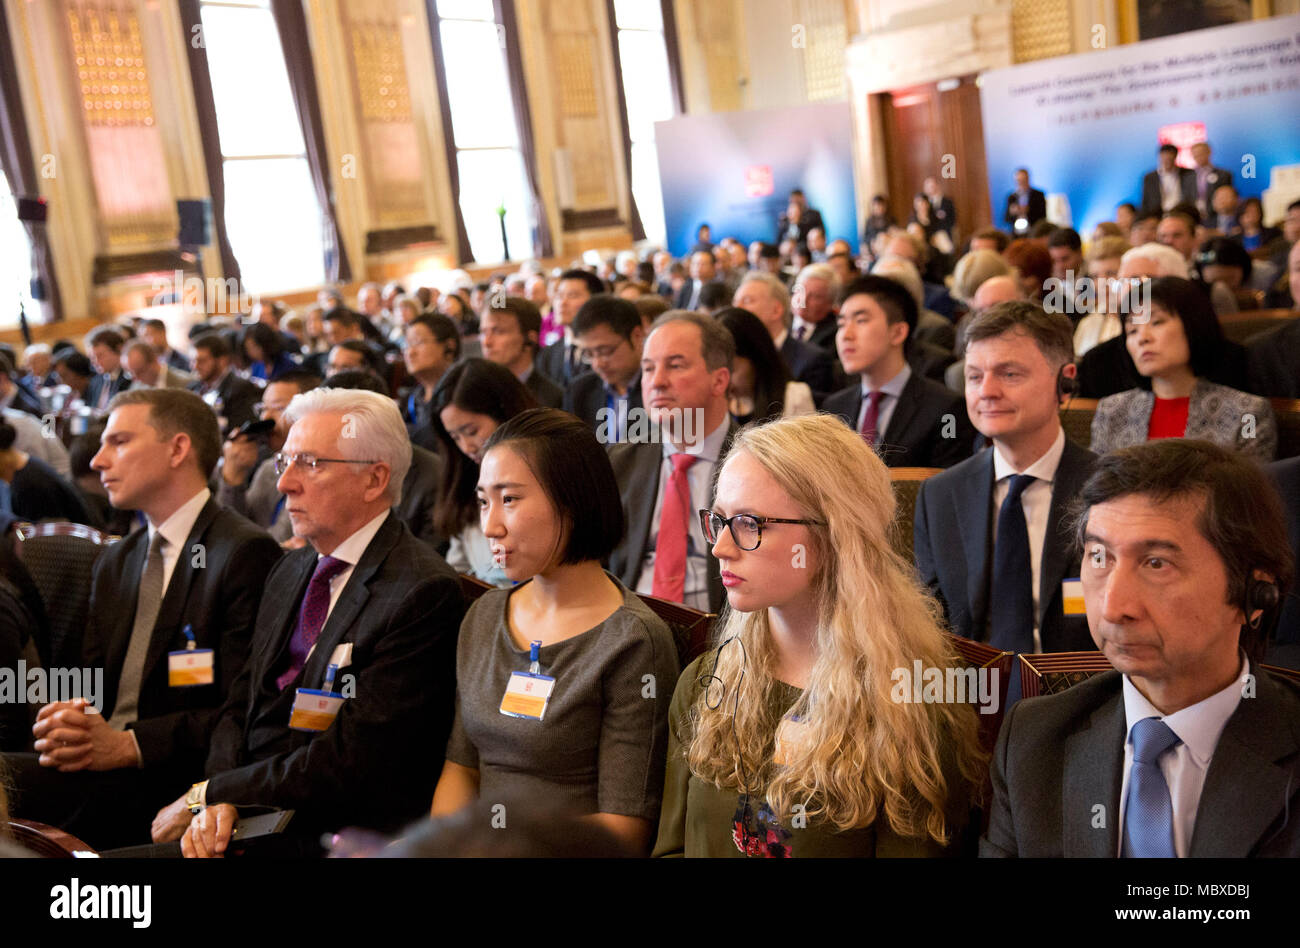 London, UK. 11th Apr, 2018. Guests listen to speeches during the launch ceremony for the multilingual versions of the second volume of "Xi Jinping: The Governance of China" in London, Britain on April 11, 2018. The book was launched in London Wednesday. Credit: Isabel Infantes/Xinhua/Alamy Live News Stock Photo